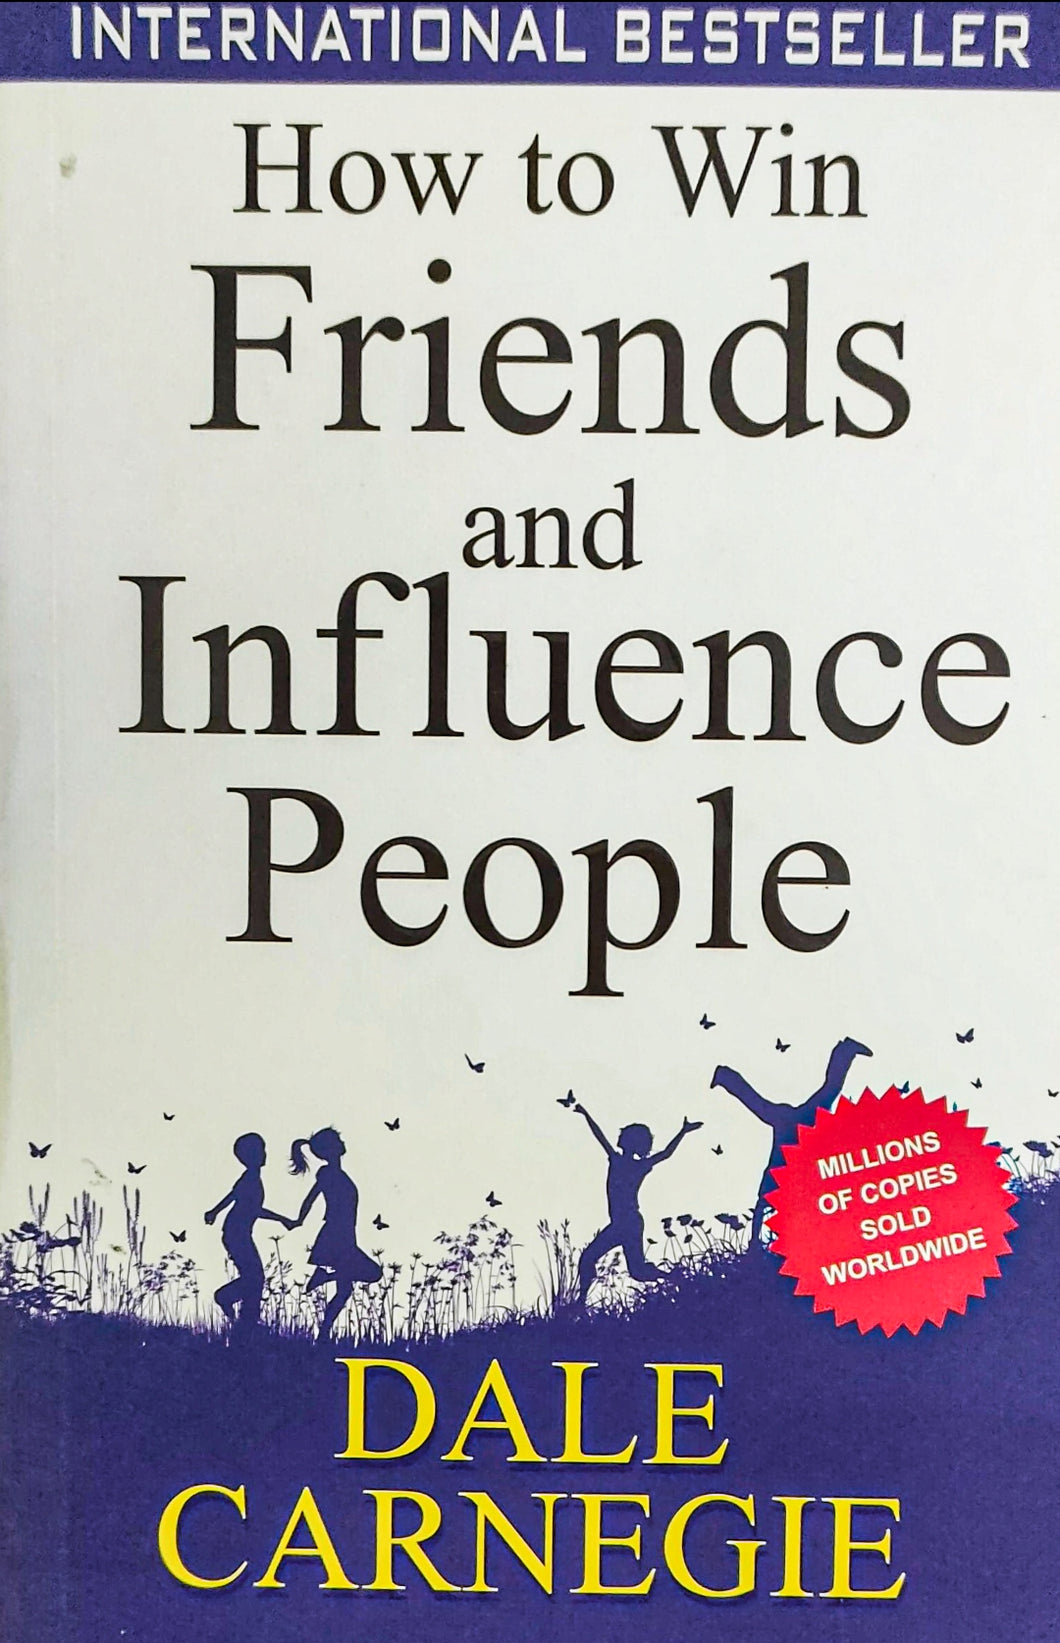 HOW TO WIN FRIENDS AND INFLUENCE PEOPLE - NOVEL BY DALE CARNEGIE